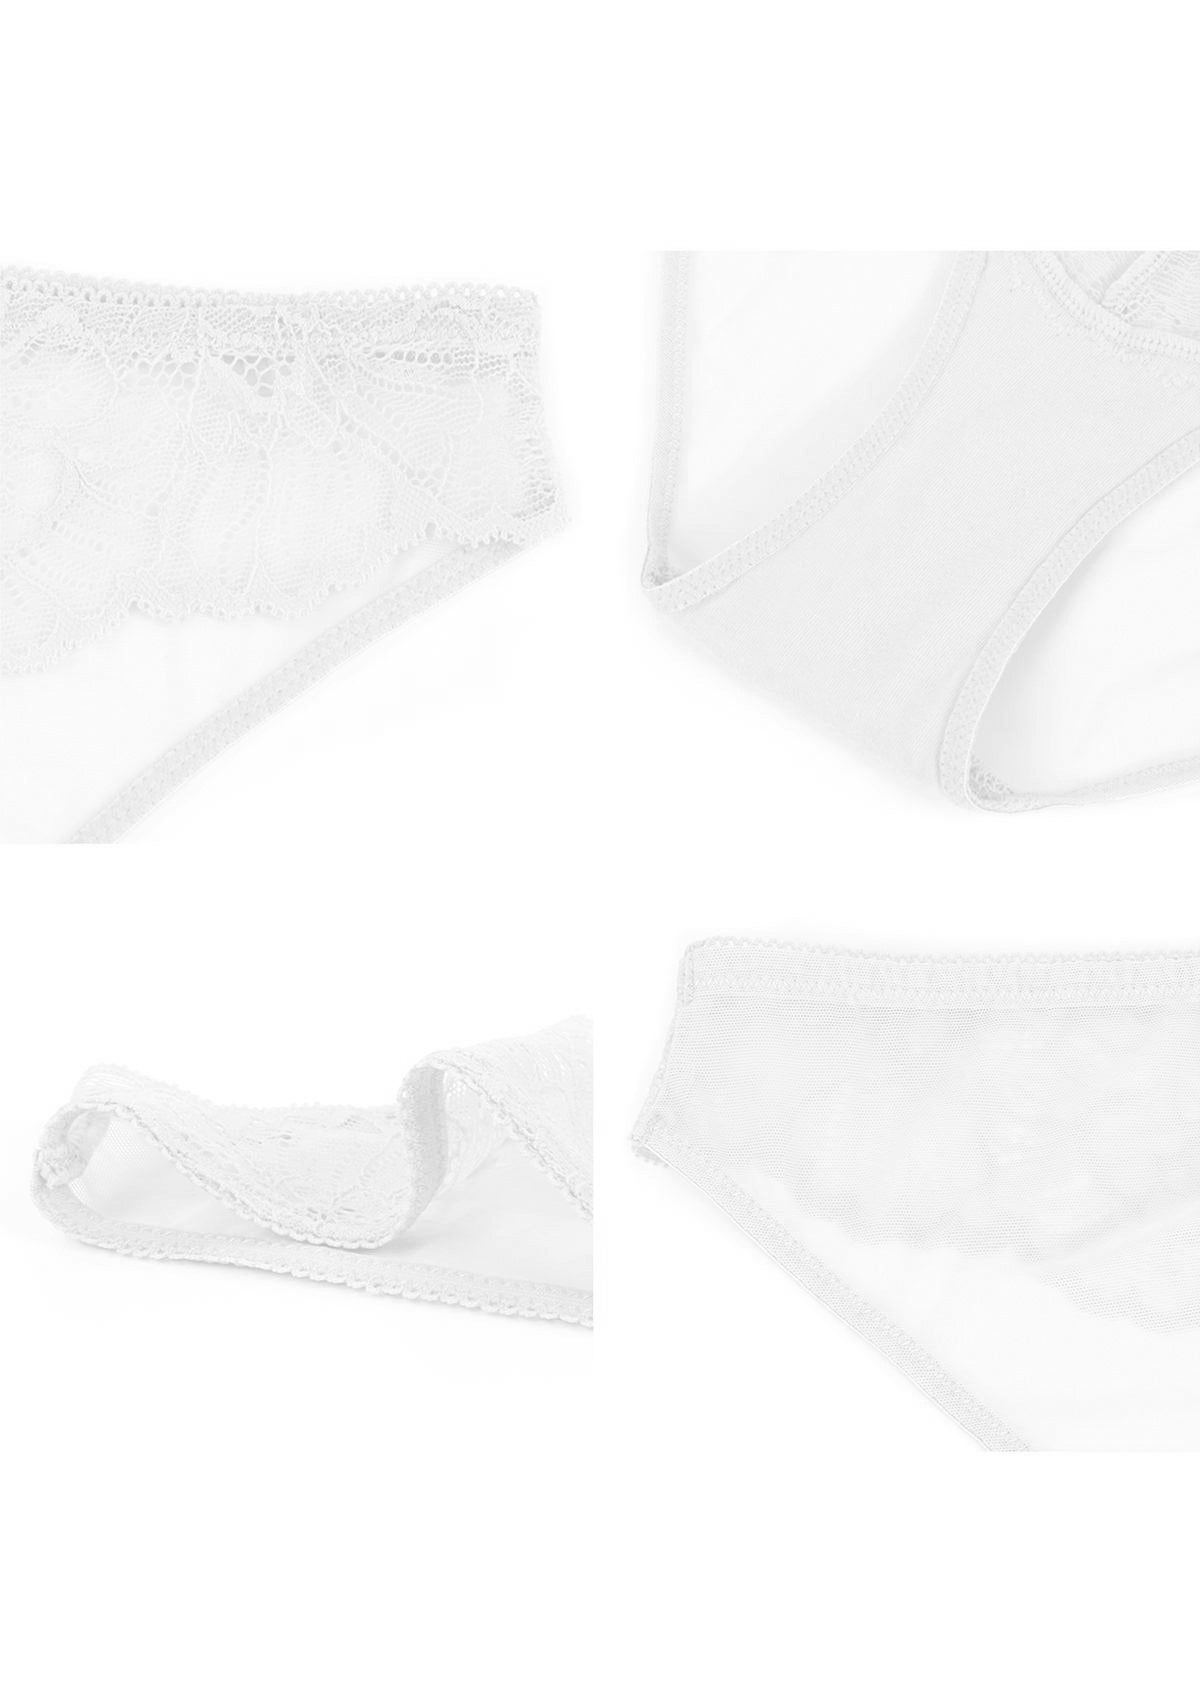 HSIA Blossom Mid-Rise Mesh Lace Panties - XXXL / White / High-Rise Brief